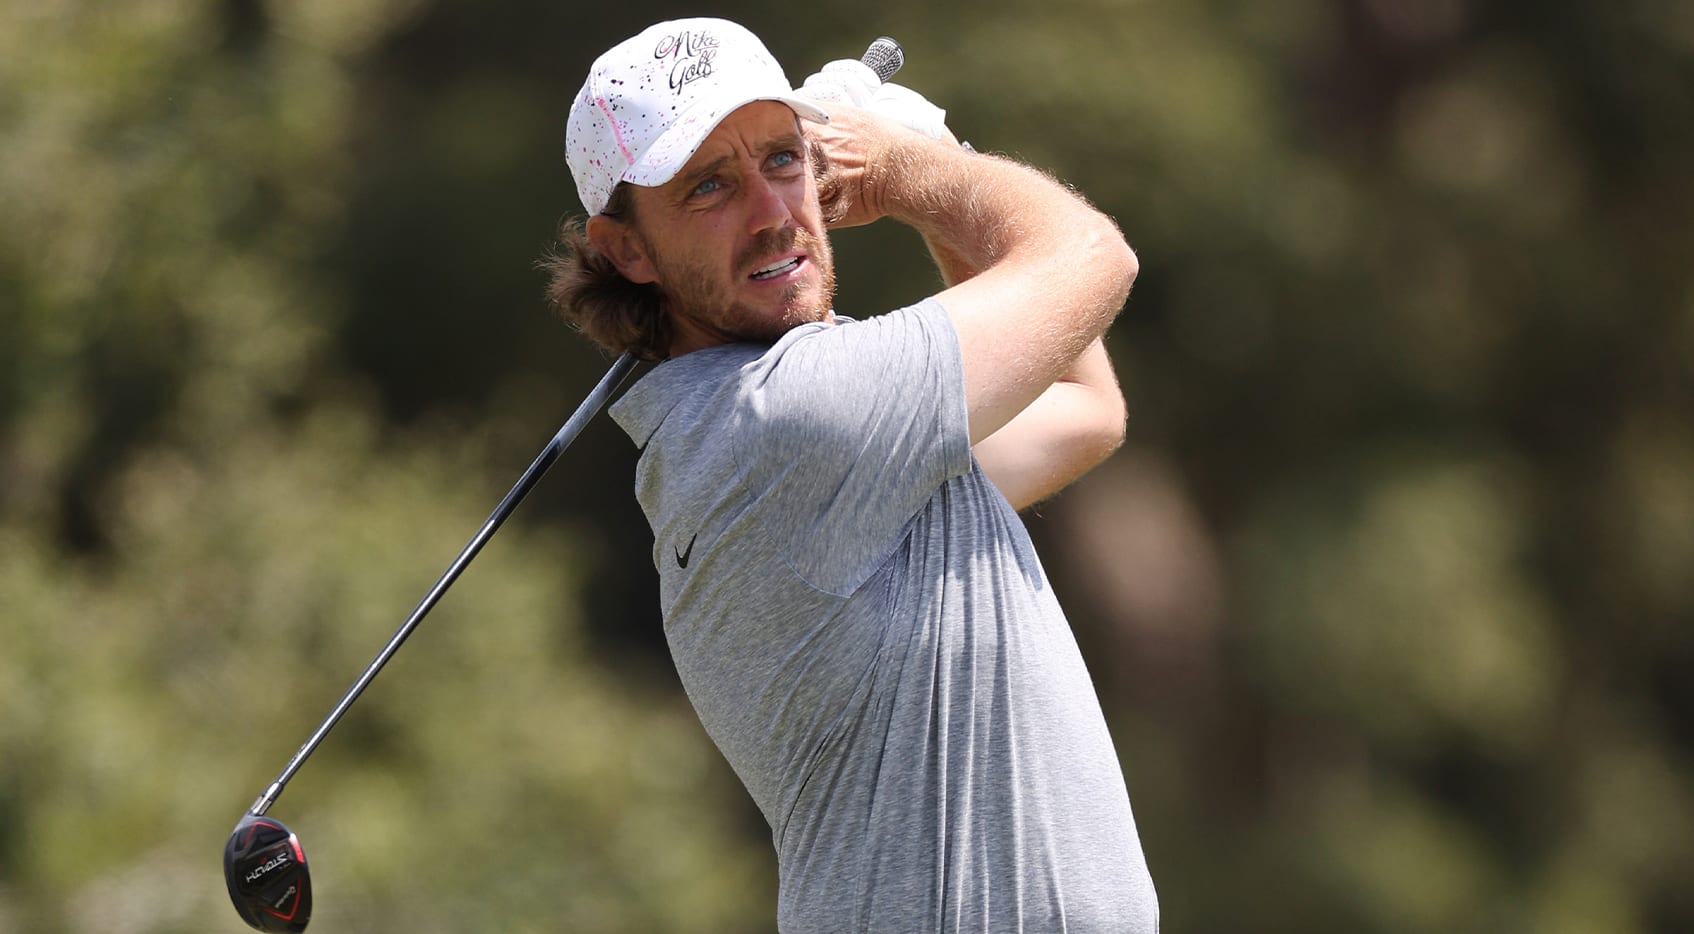 Action Report Bettors like a Tommy Fleetwood breakthrough at Travelers Championship